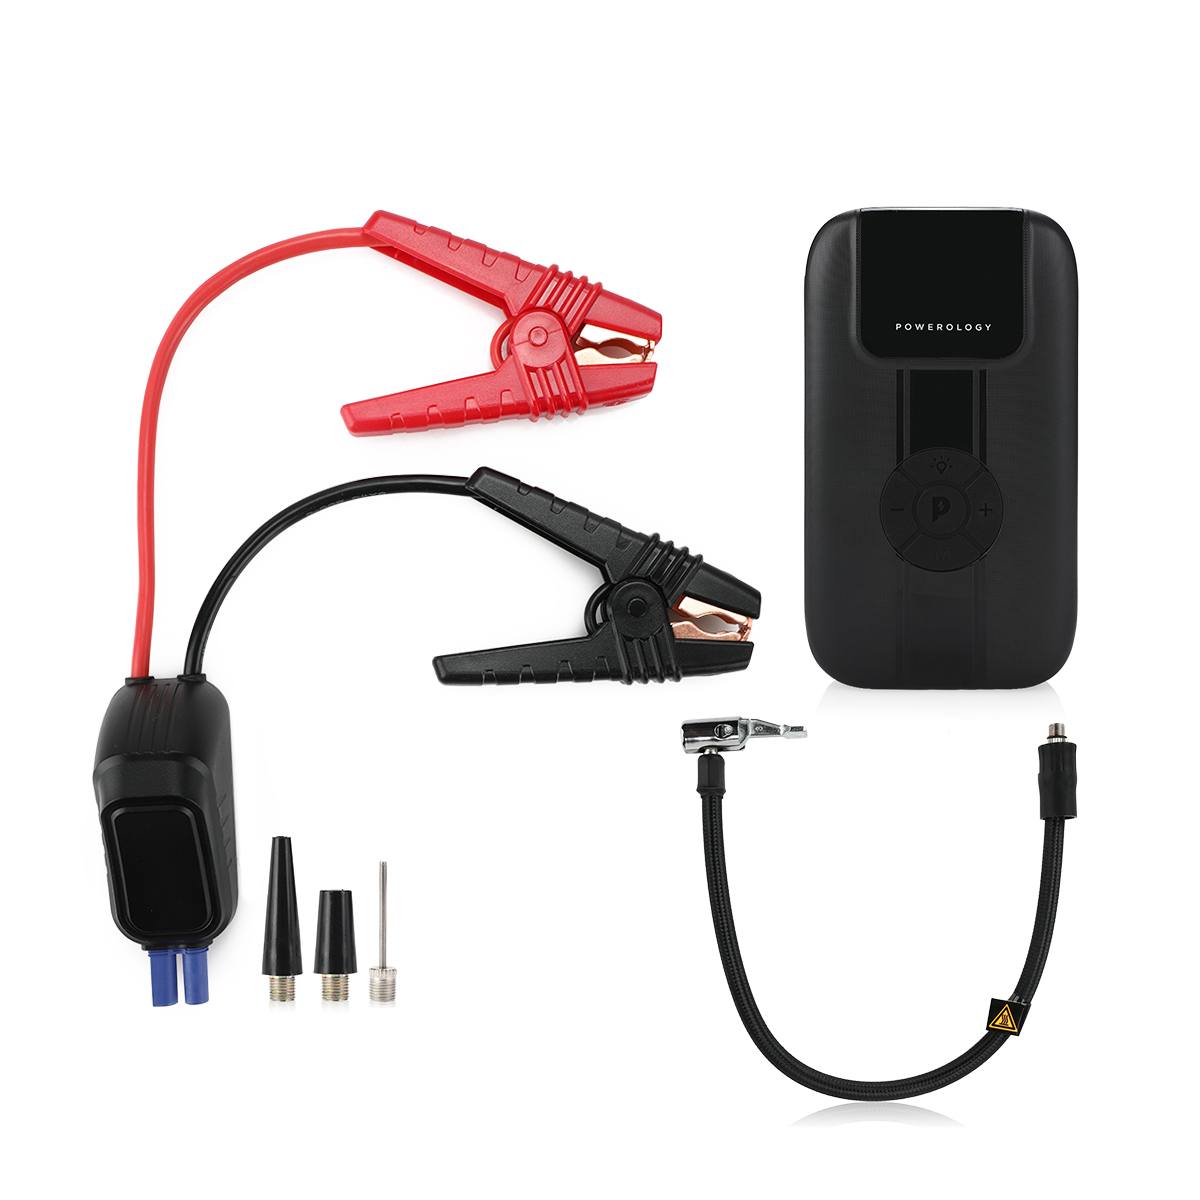 Buy Jump Starter with Air Compressor and Power Bank - Black Online